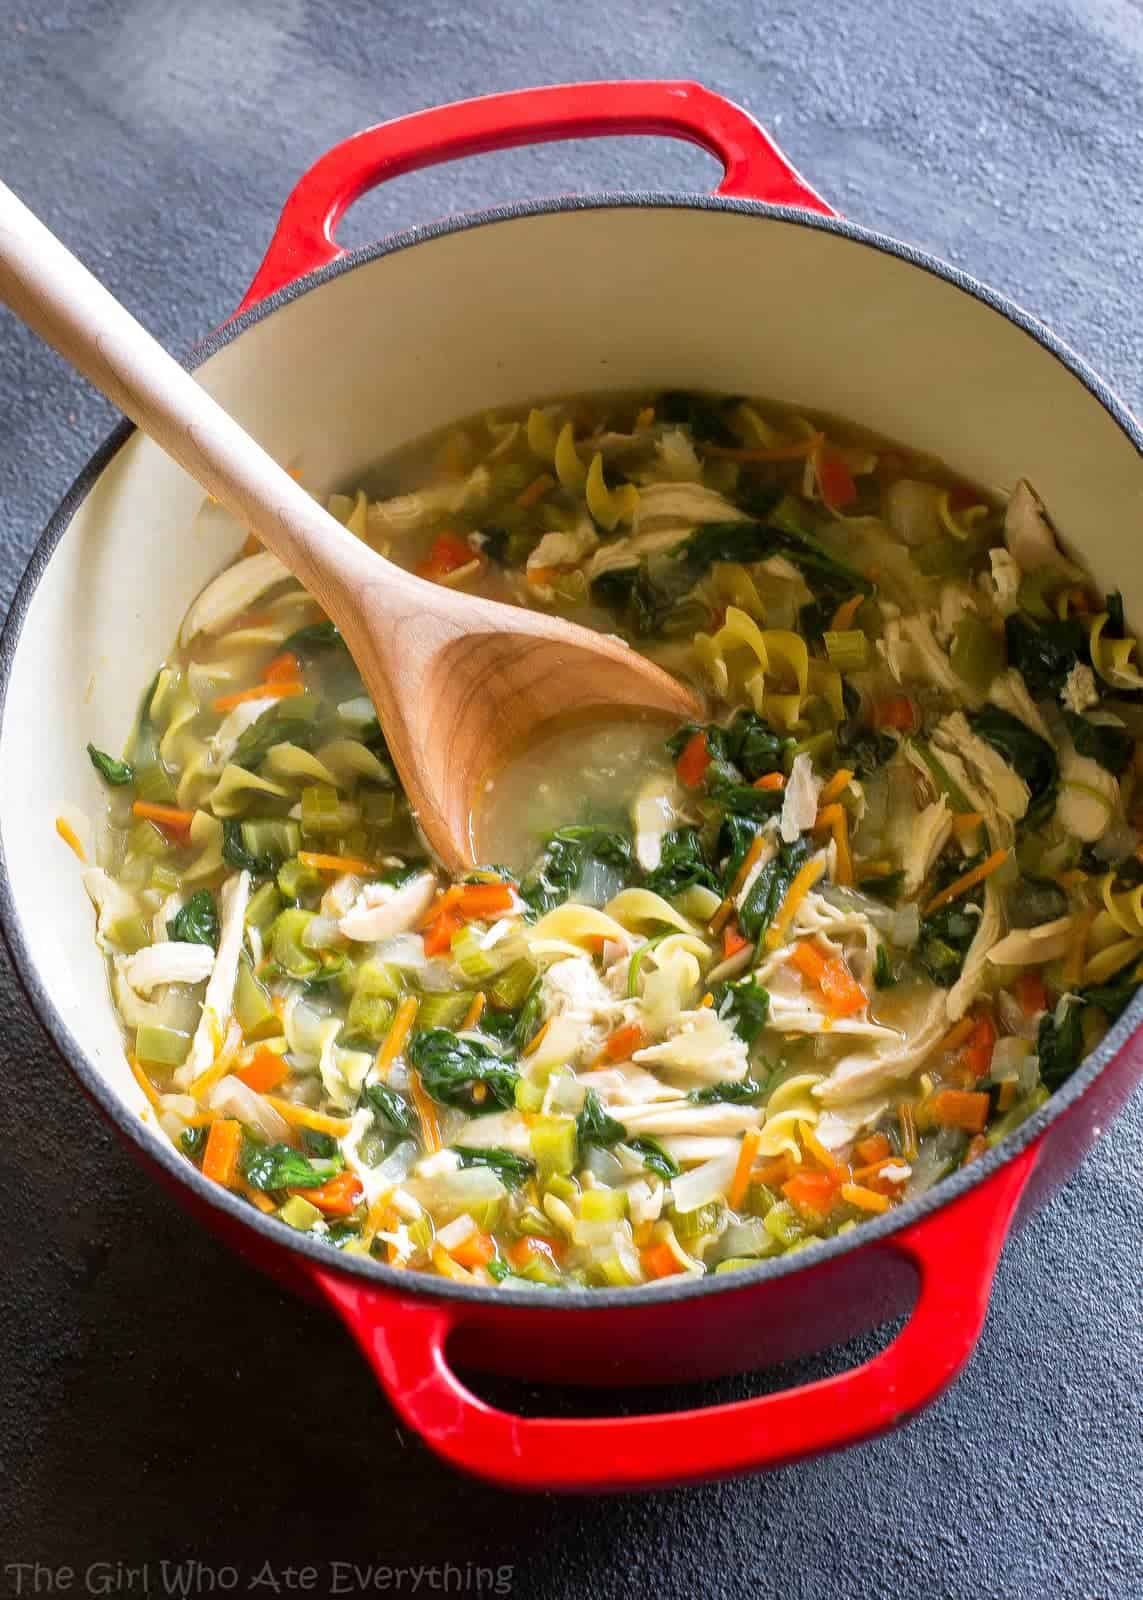 https://www.the-girl-who-ate-everything.com/wp-content/uploads/2017/03/healthy-vegetable-soup-3.jpg